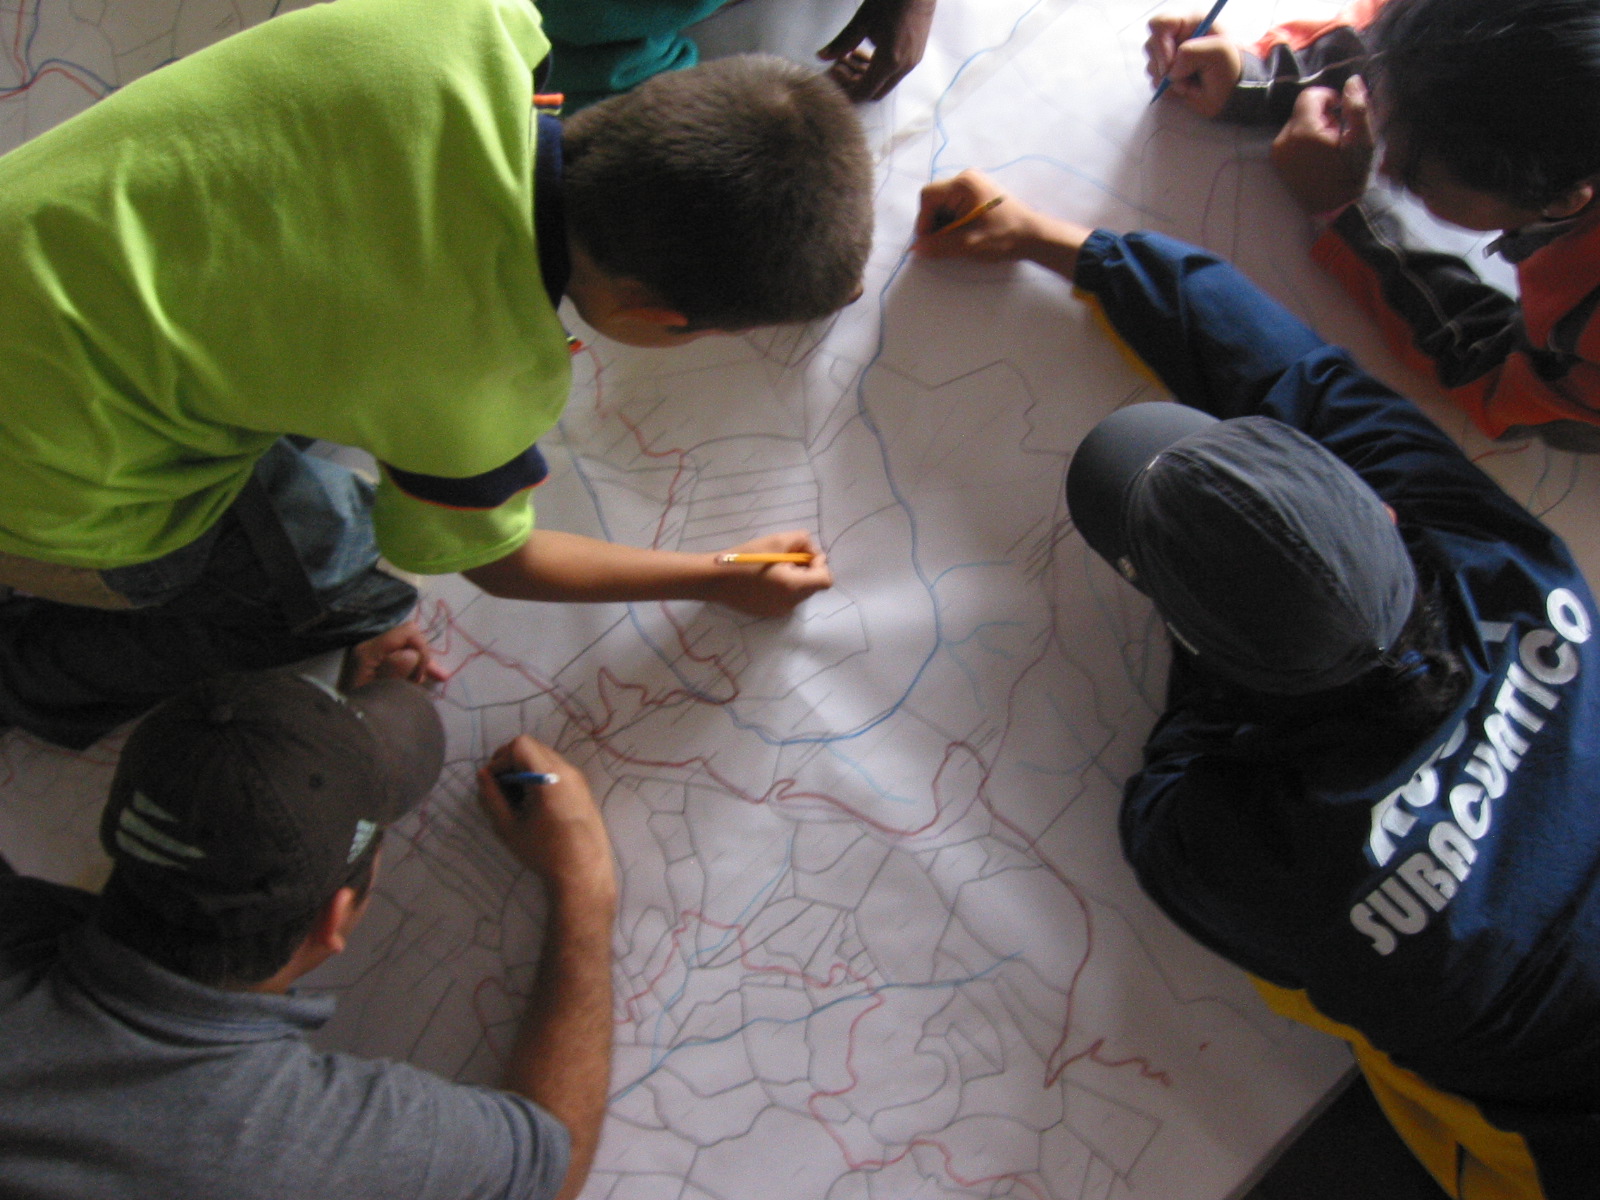 Children drawing on a map